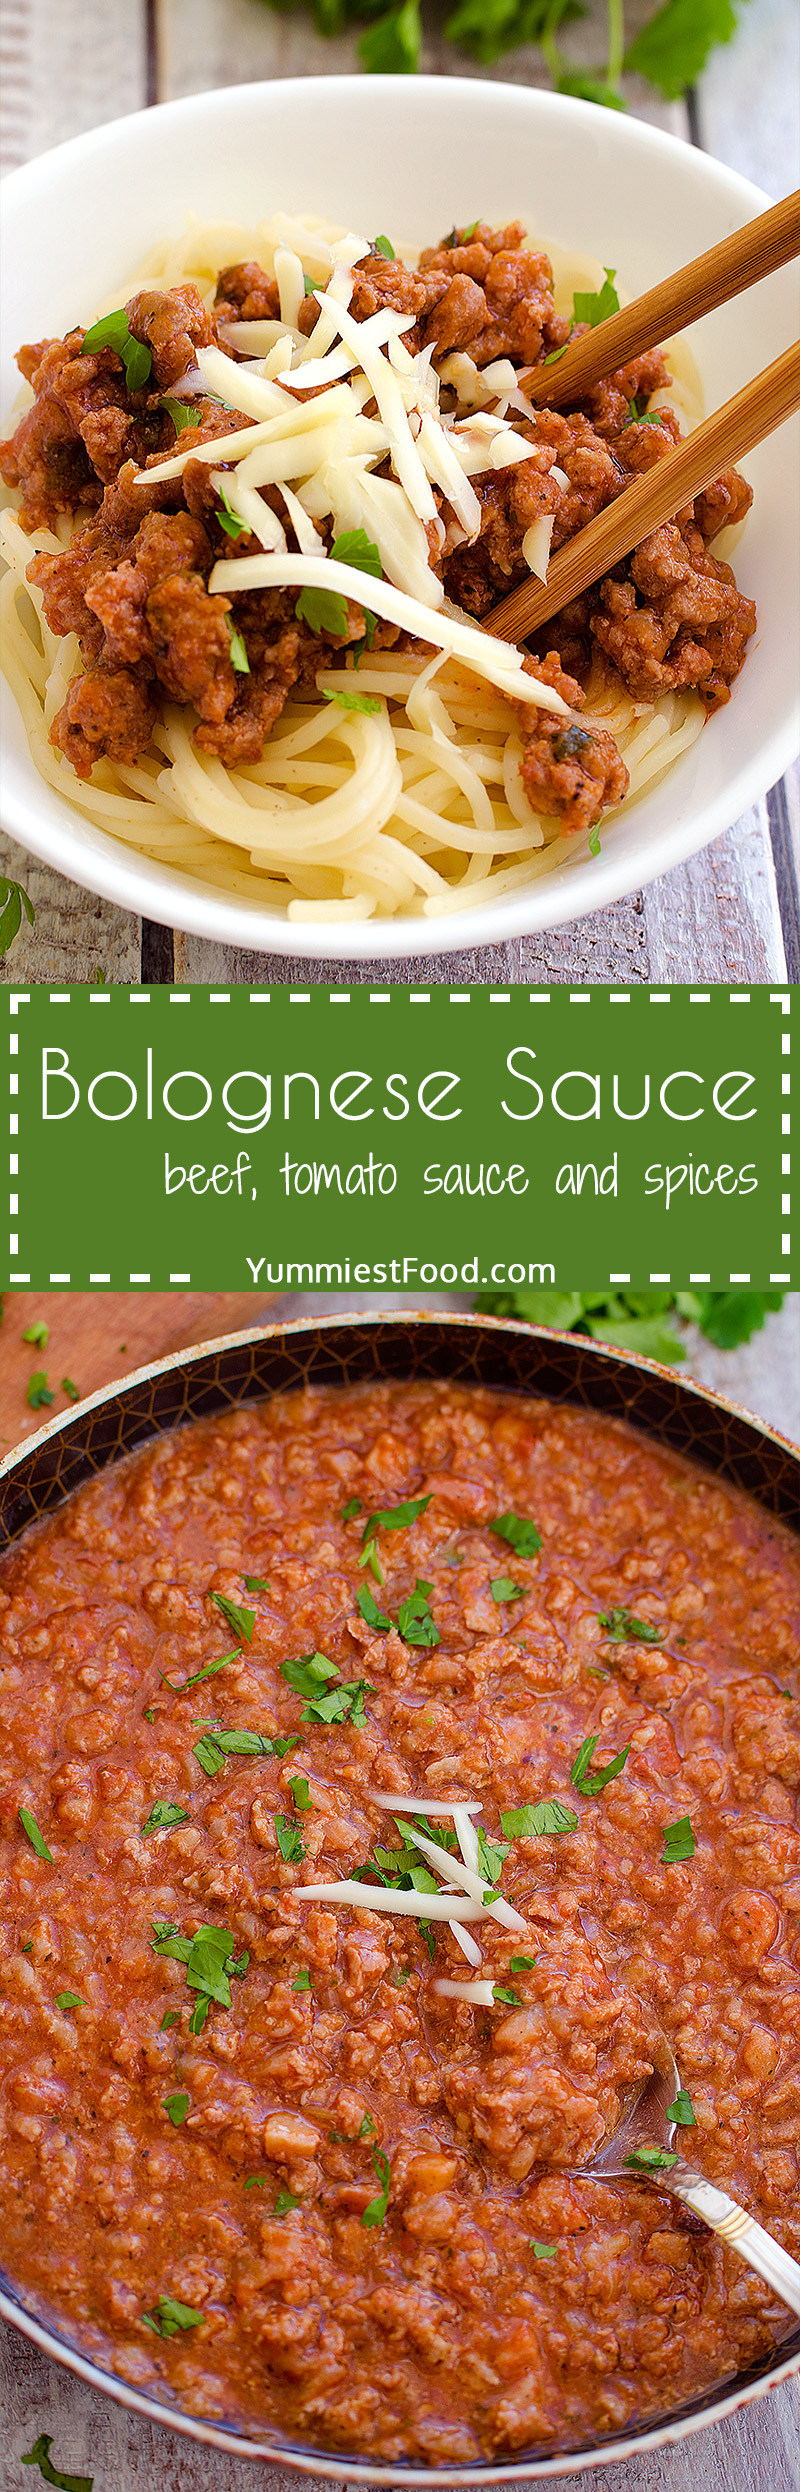 Bolognese Sauce - you must try to make my version of Bolognese Sauce and I’m sure that you will list it in your weekly menu.